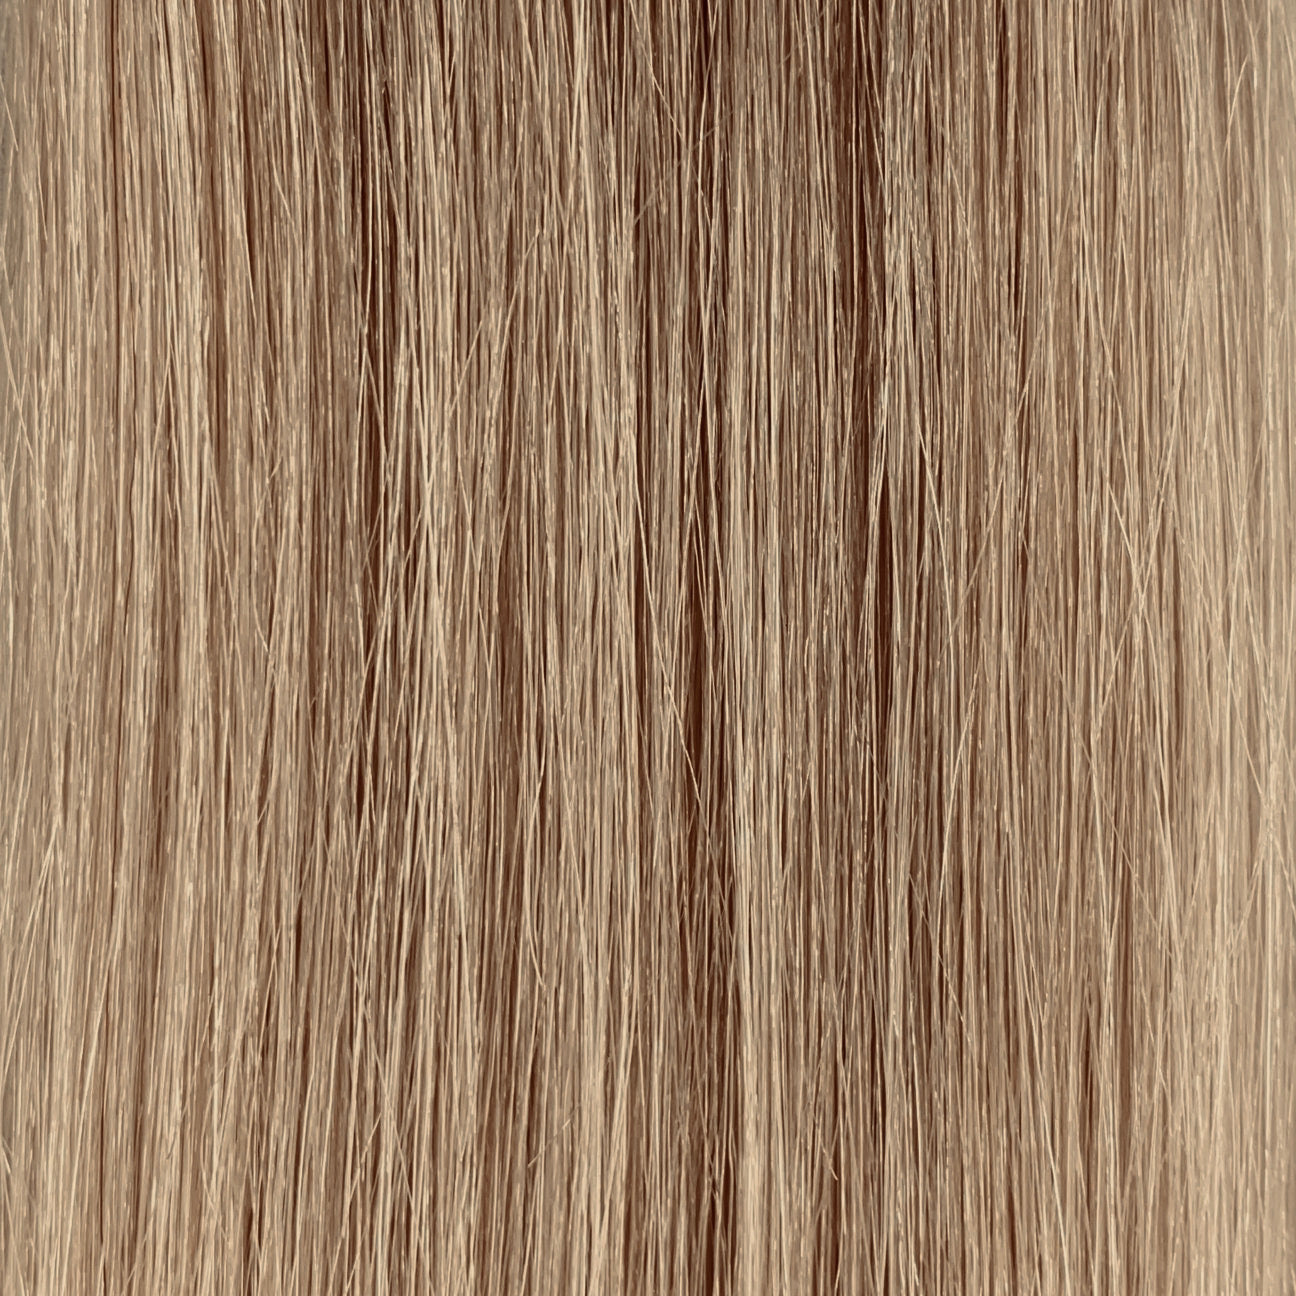 50 cm | Normal Tape Extensions | No. 10 naturblond